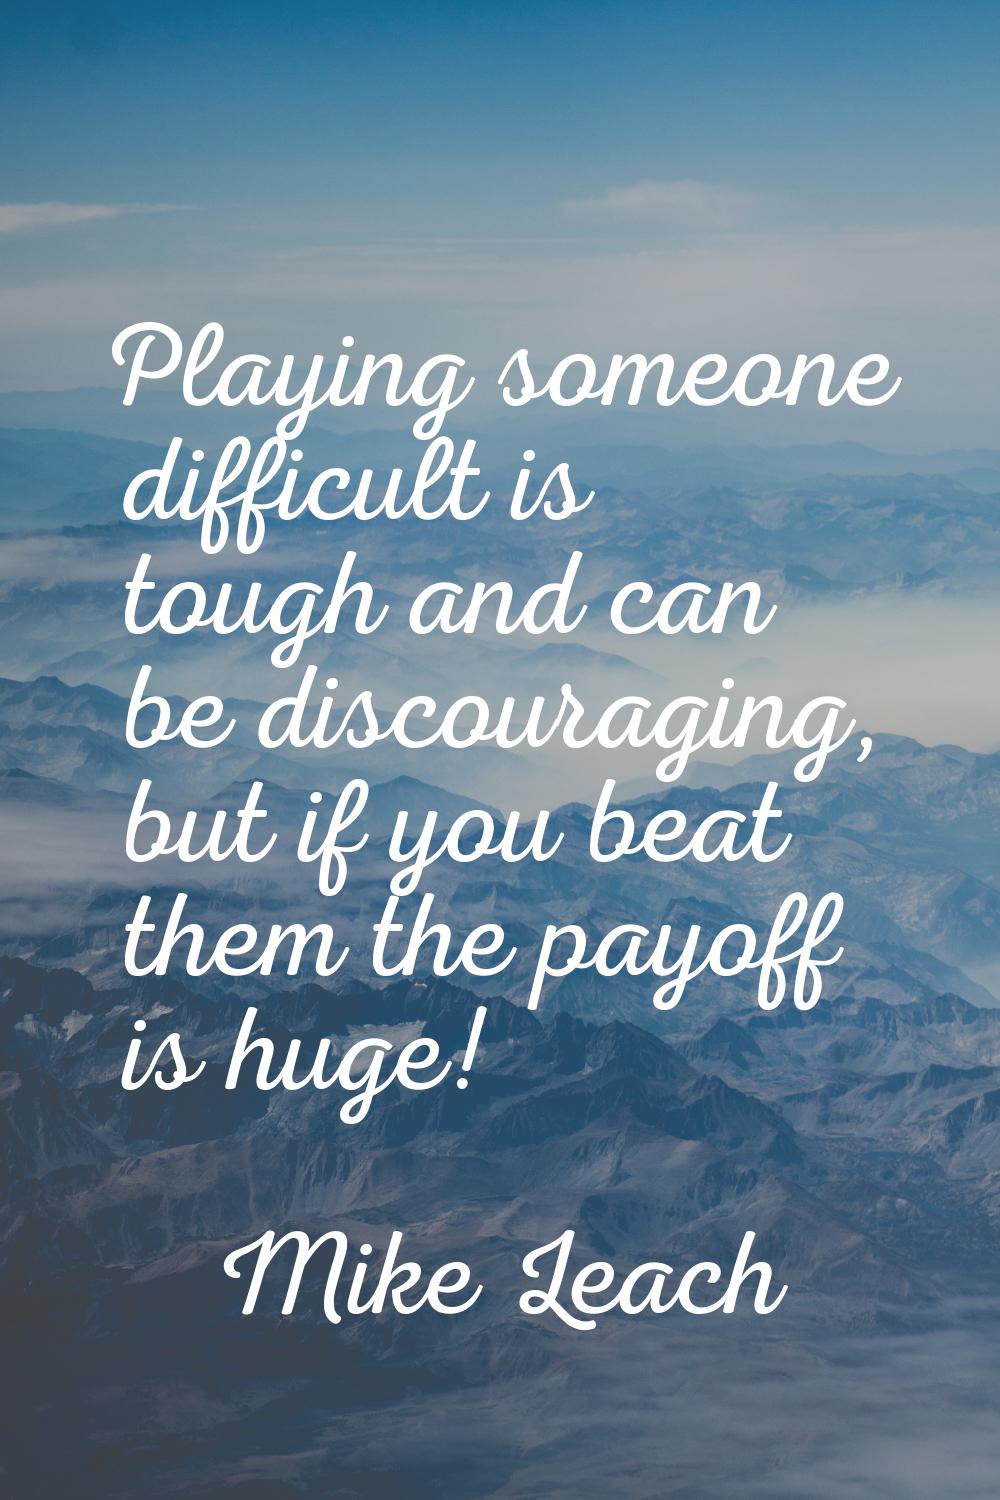 Playing someone difficult is tough and can be discouraging, but if you beat them the payoff is huge